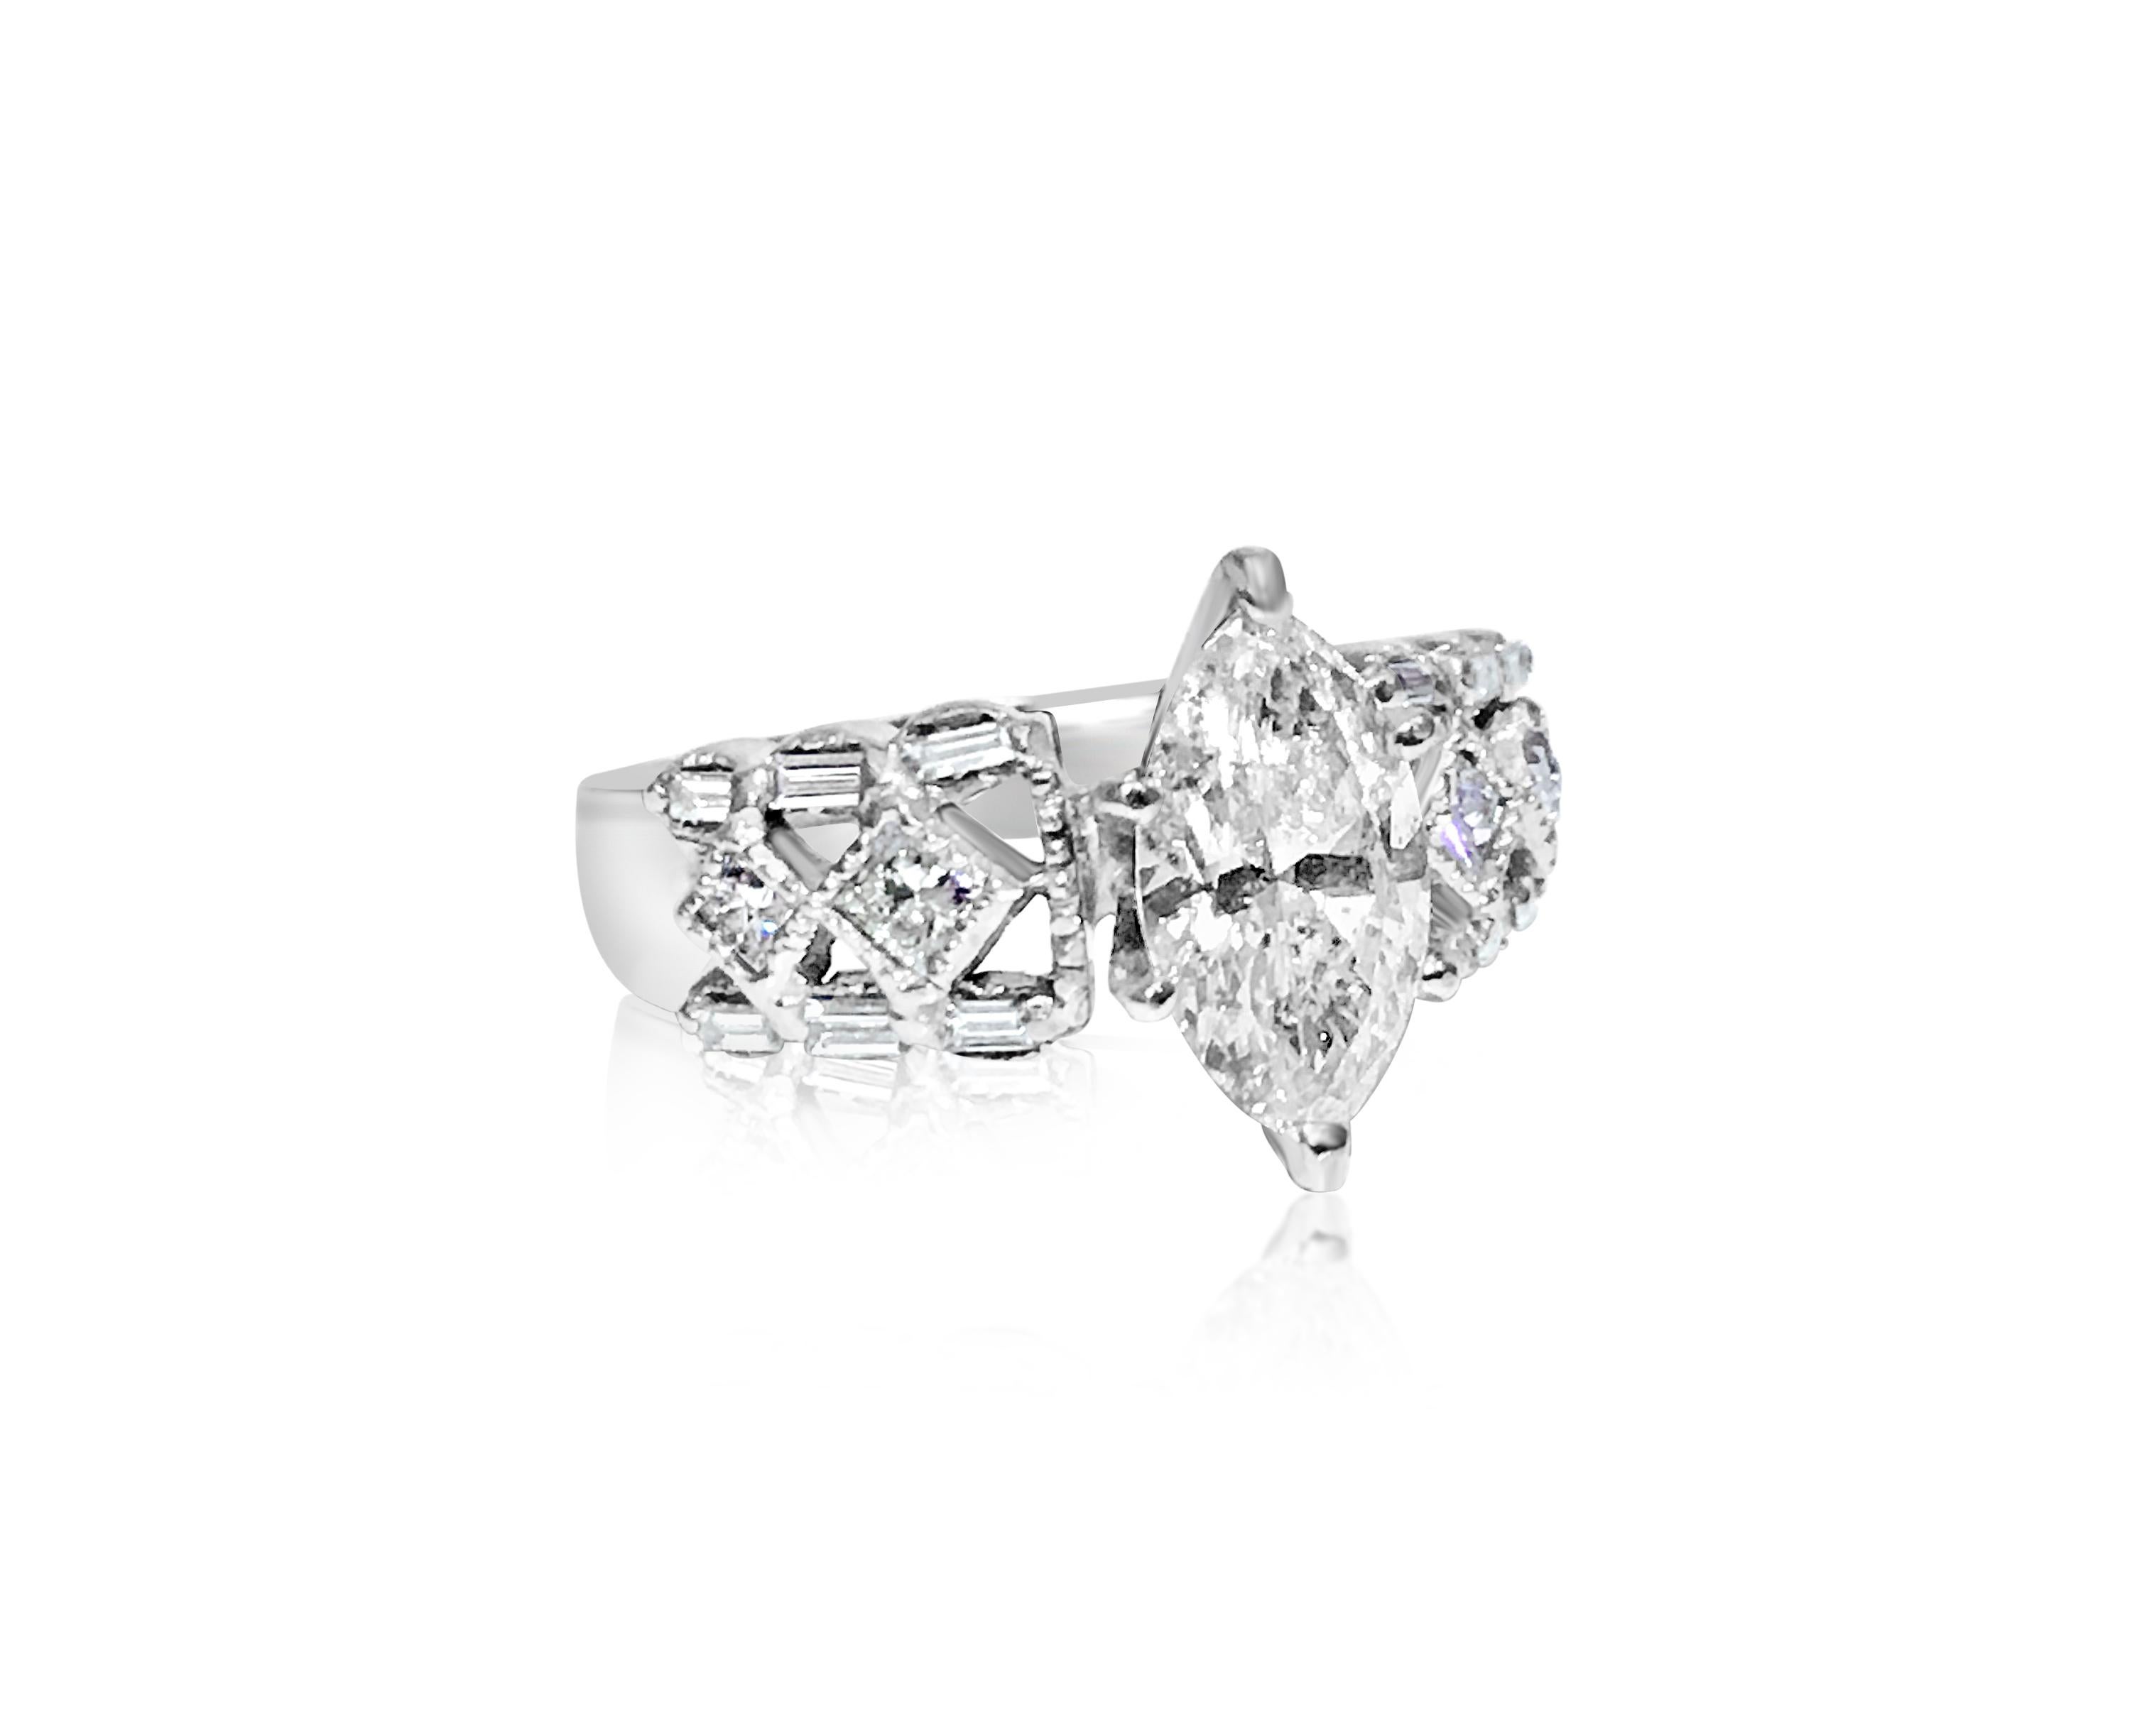 Metal: 14K white gold. 

Center diamond: 1.65 carat marquise cut diamond, 100% natural earth mined.
SI2 clarity and I color. 

Side diamonds: 0.70 carats total, VS clarity and F color. Round brilliant cut diamonds. 100% natural earth mined diamonds.